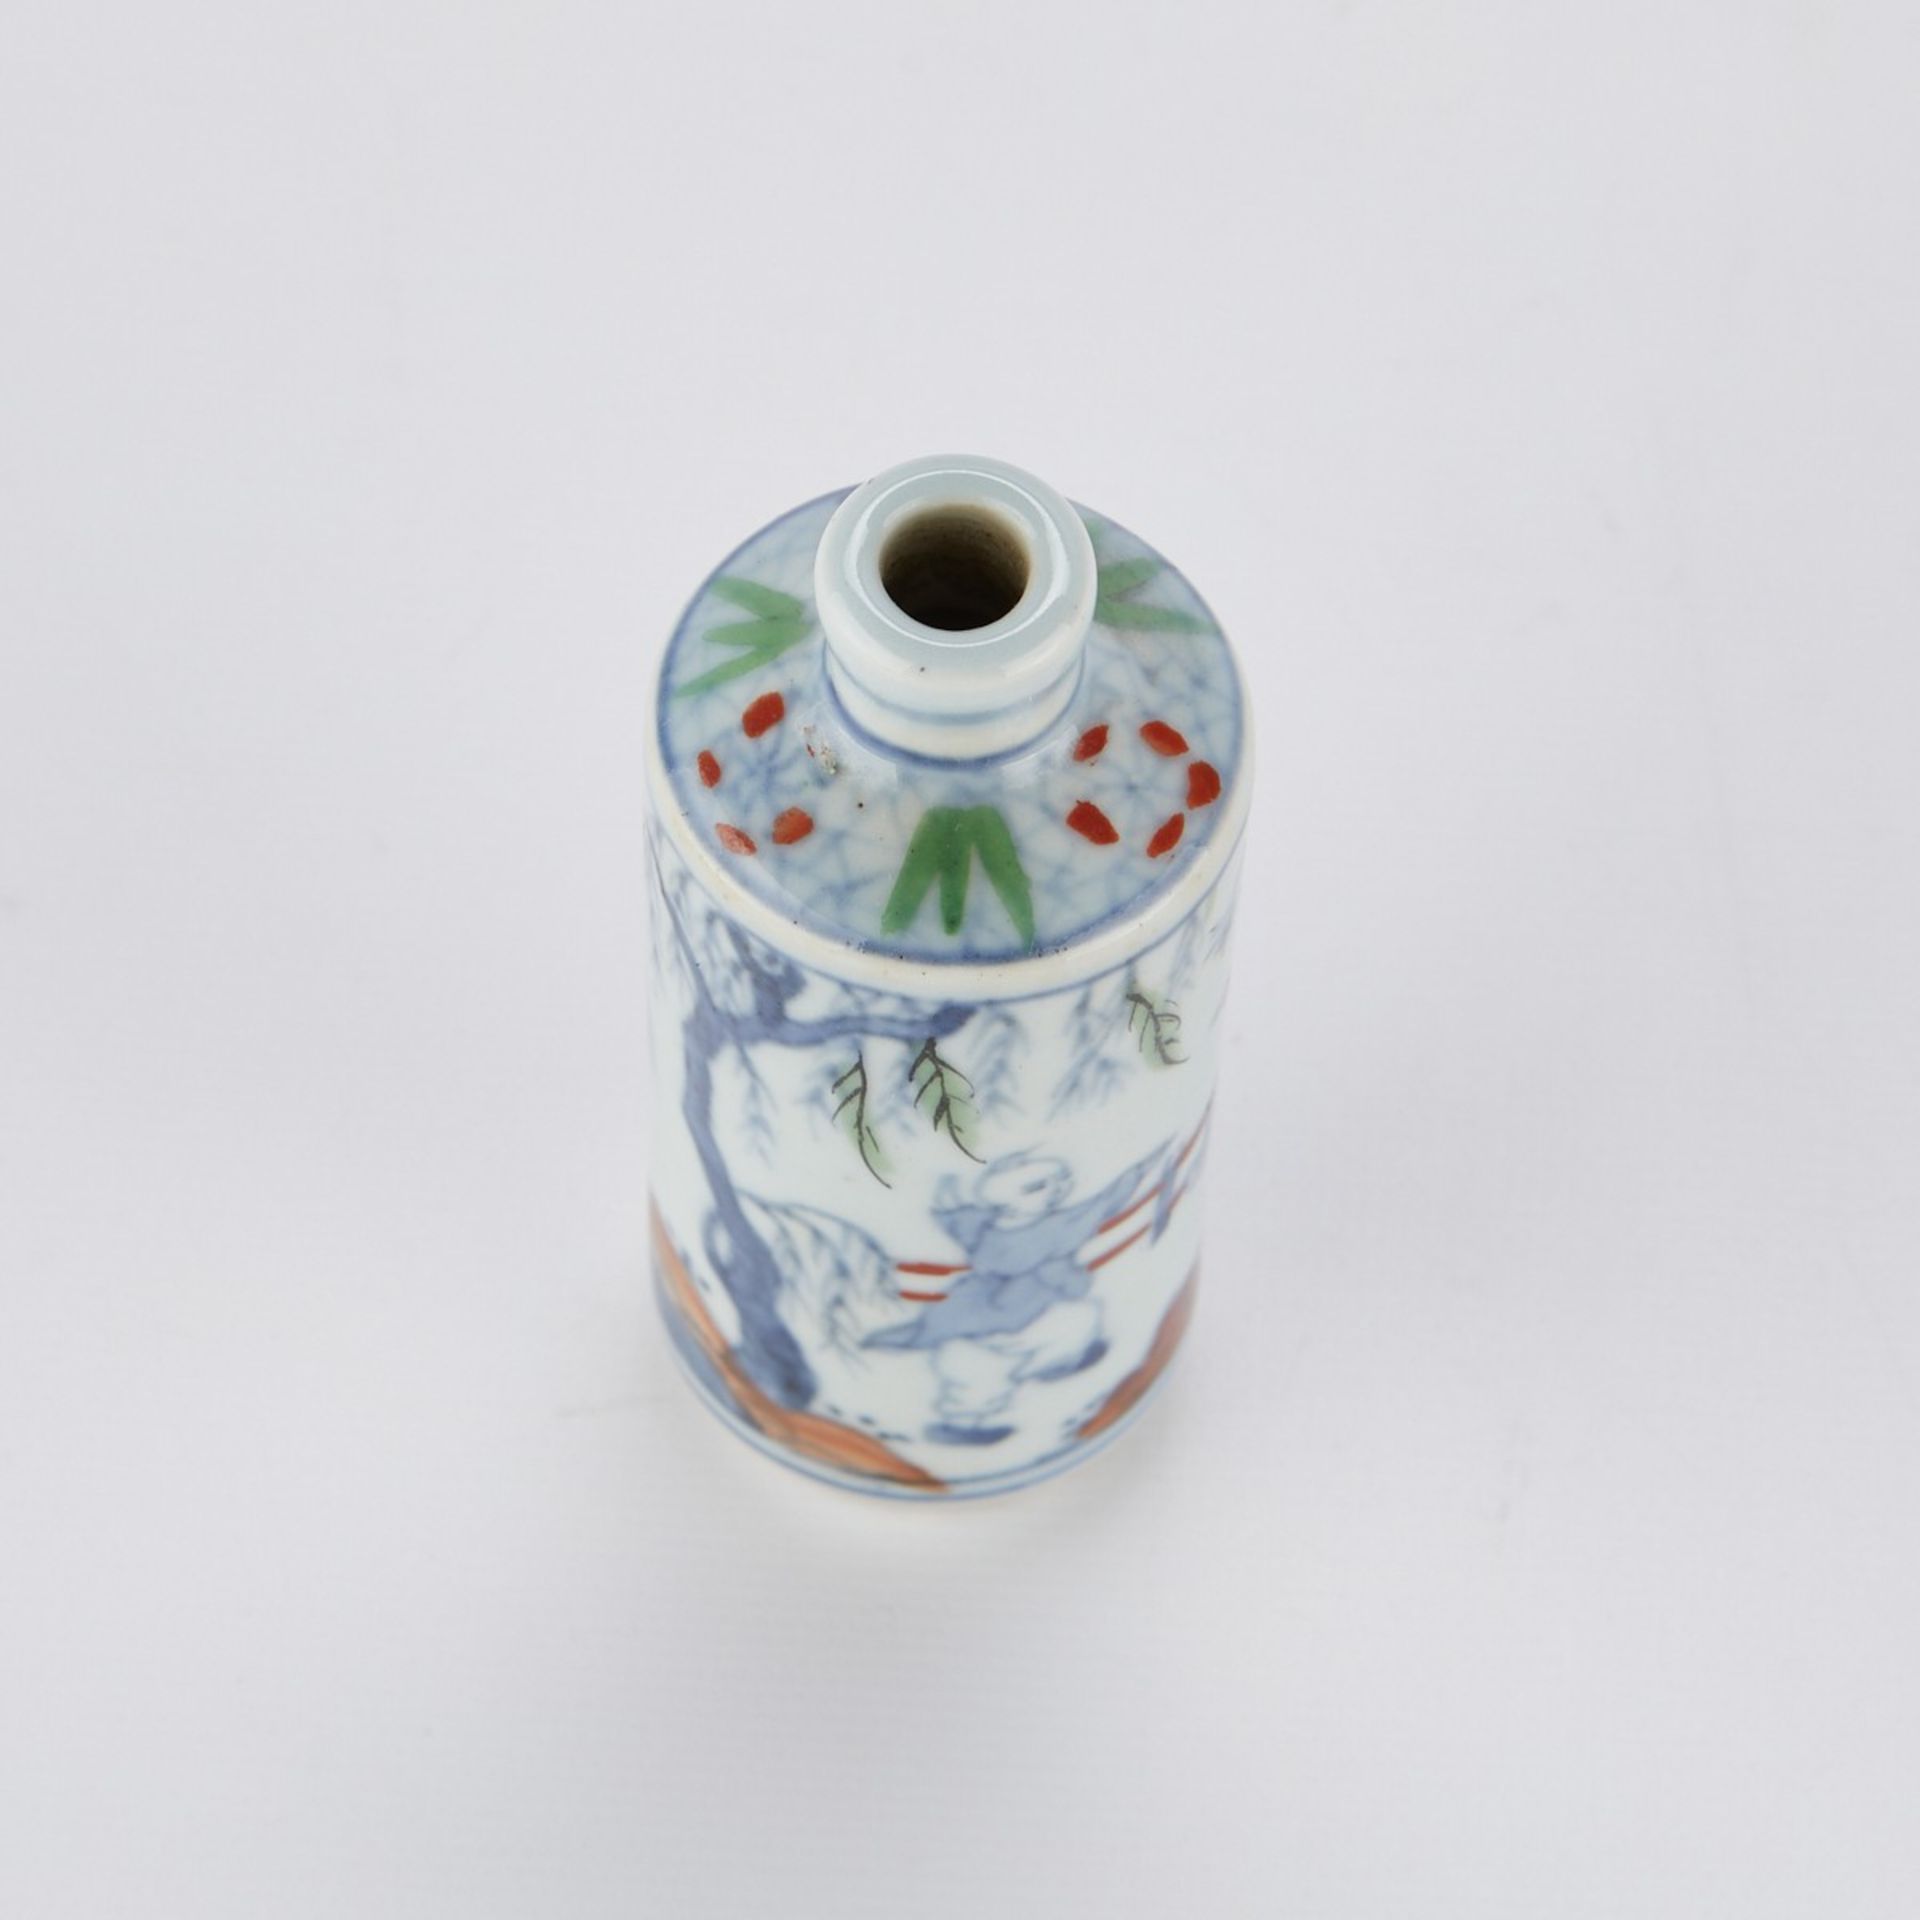 19th c. Chinese Doucai Porcelain Snuff Bottle - Image 5 of 6